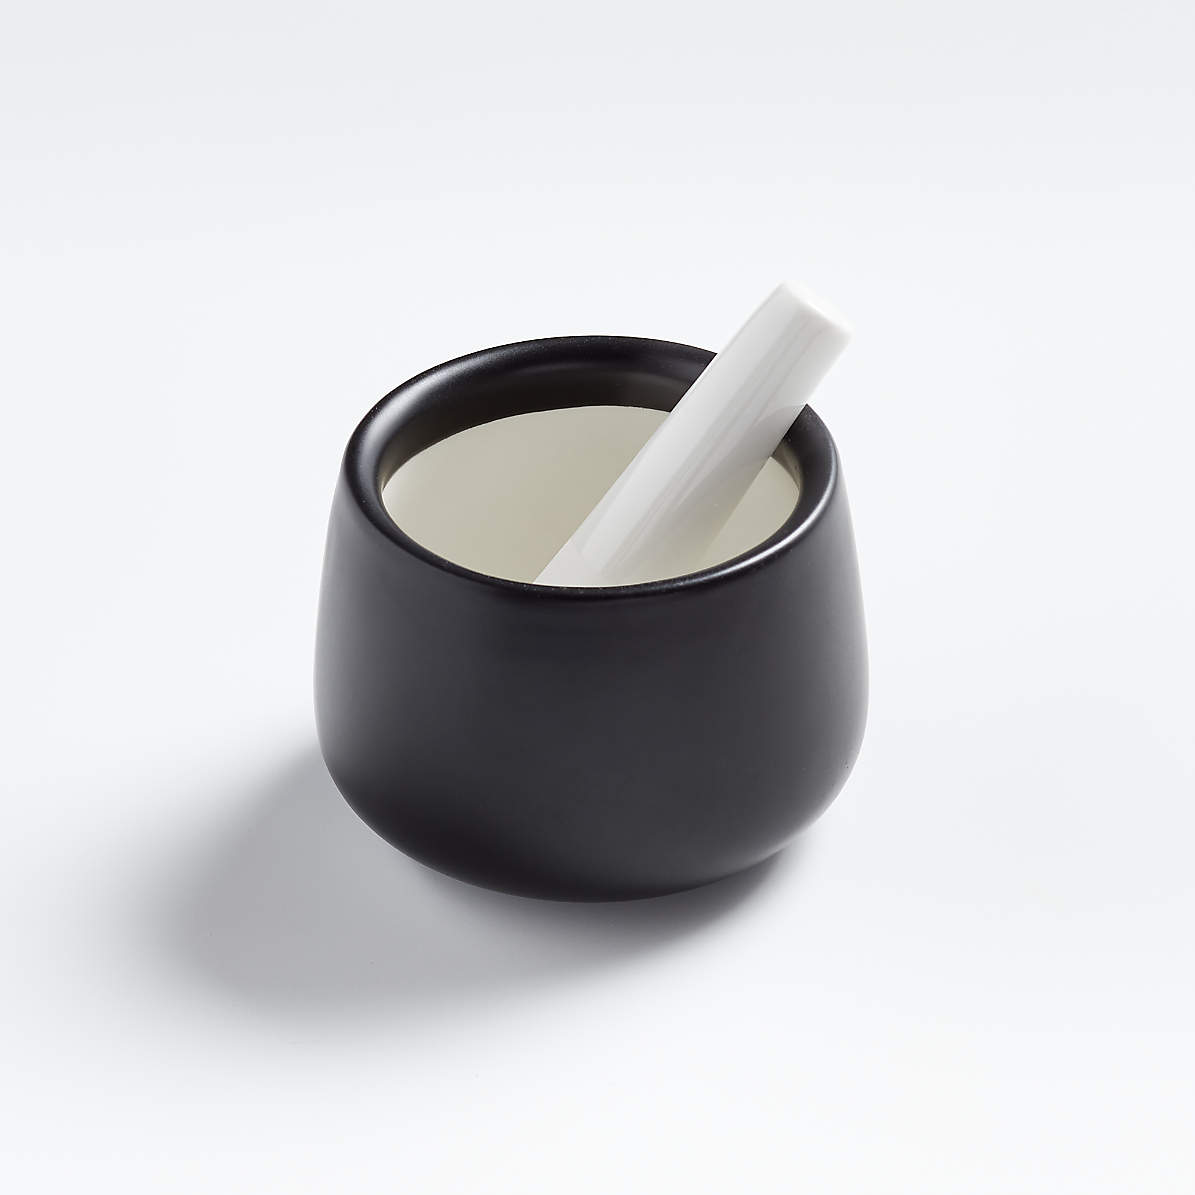 Mortar and Pestle Set - Small Grinding Bowl Container for